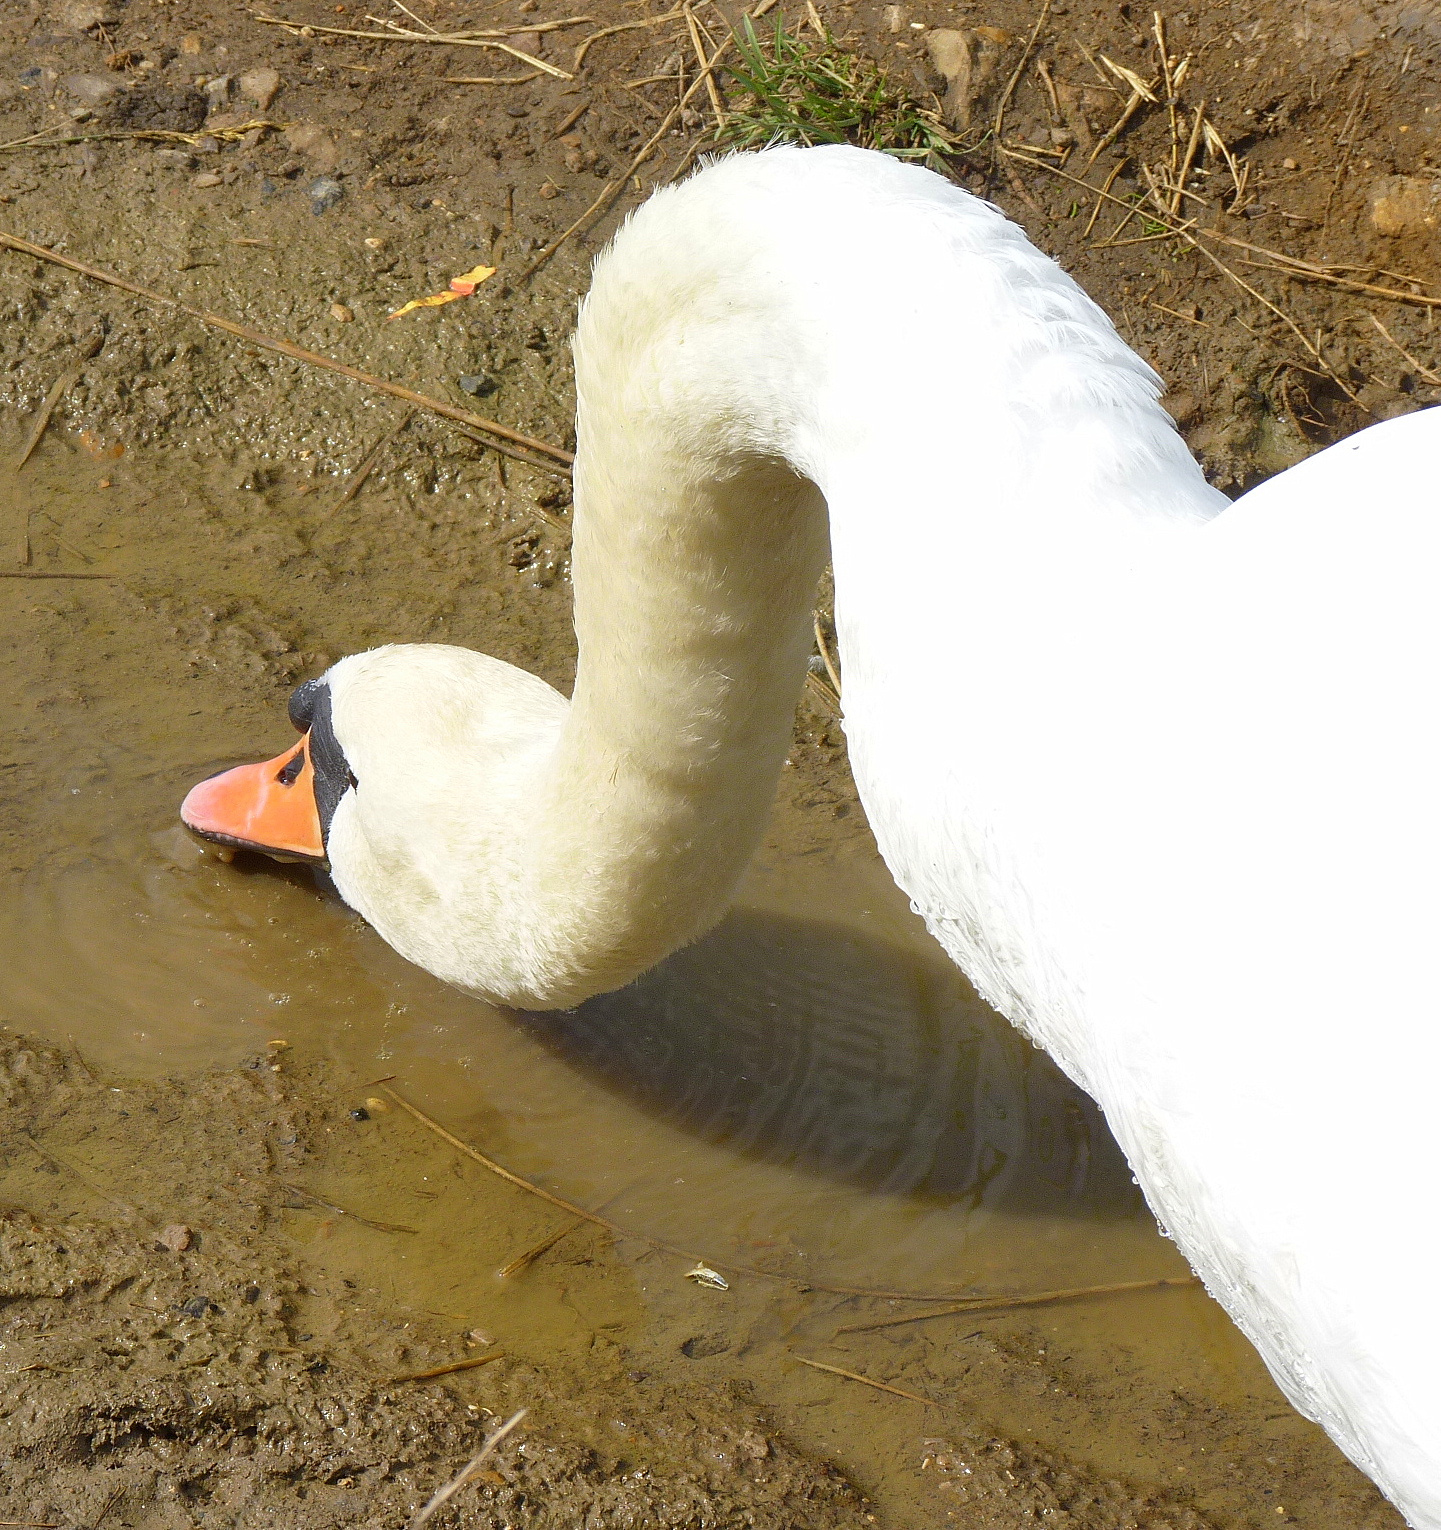 Birding For Pleasure: Swans -called in for a drink!